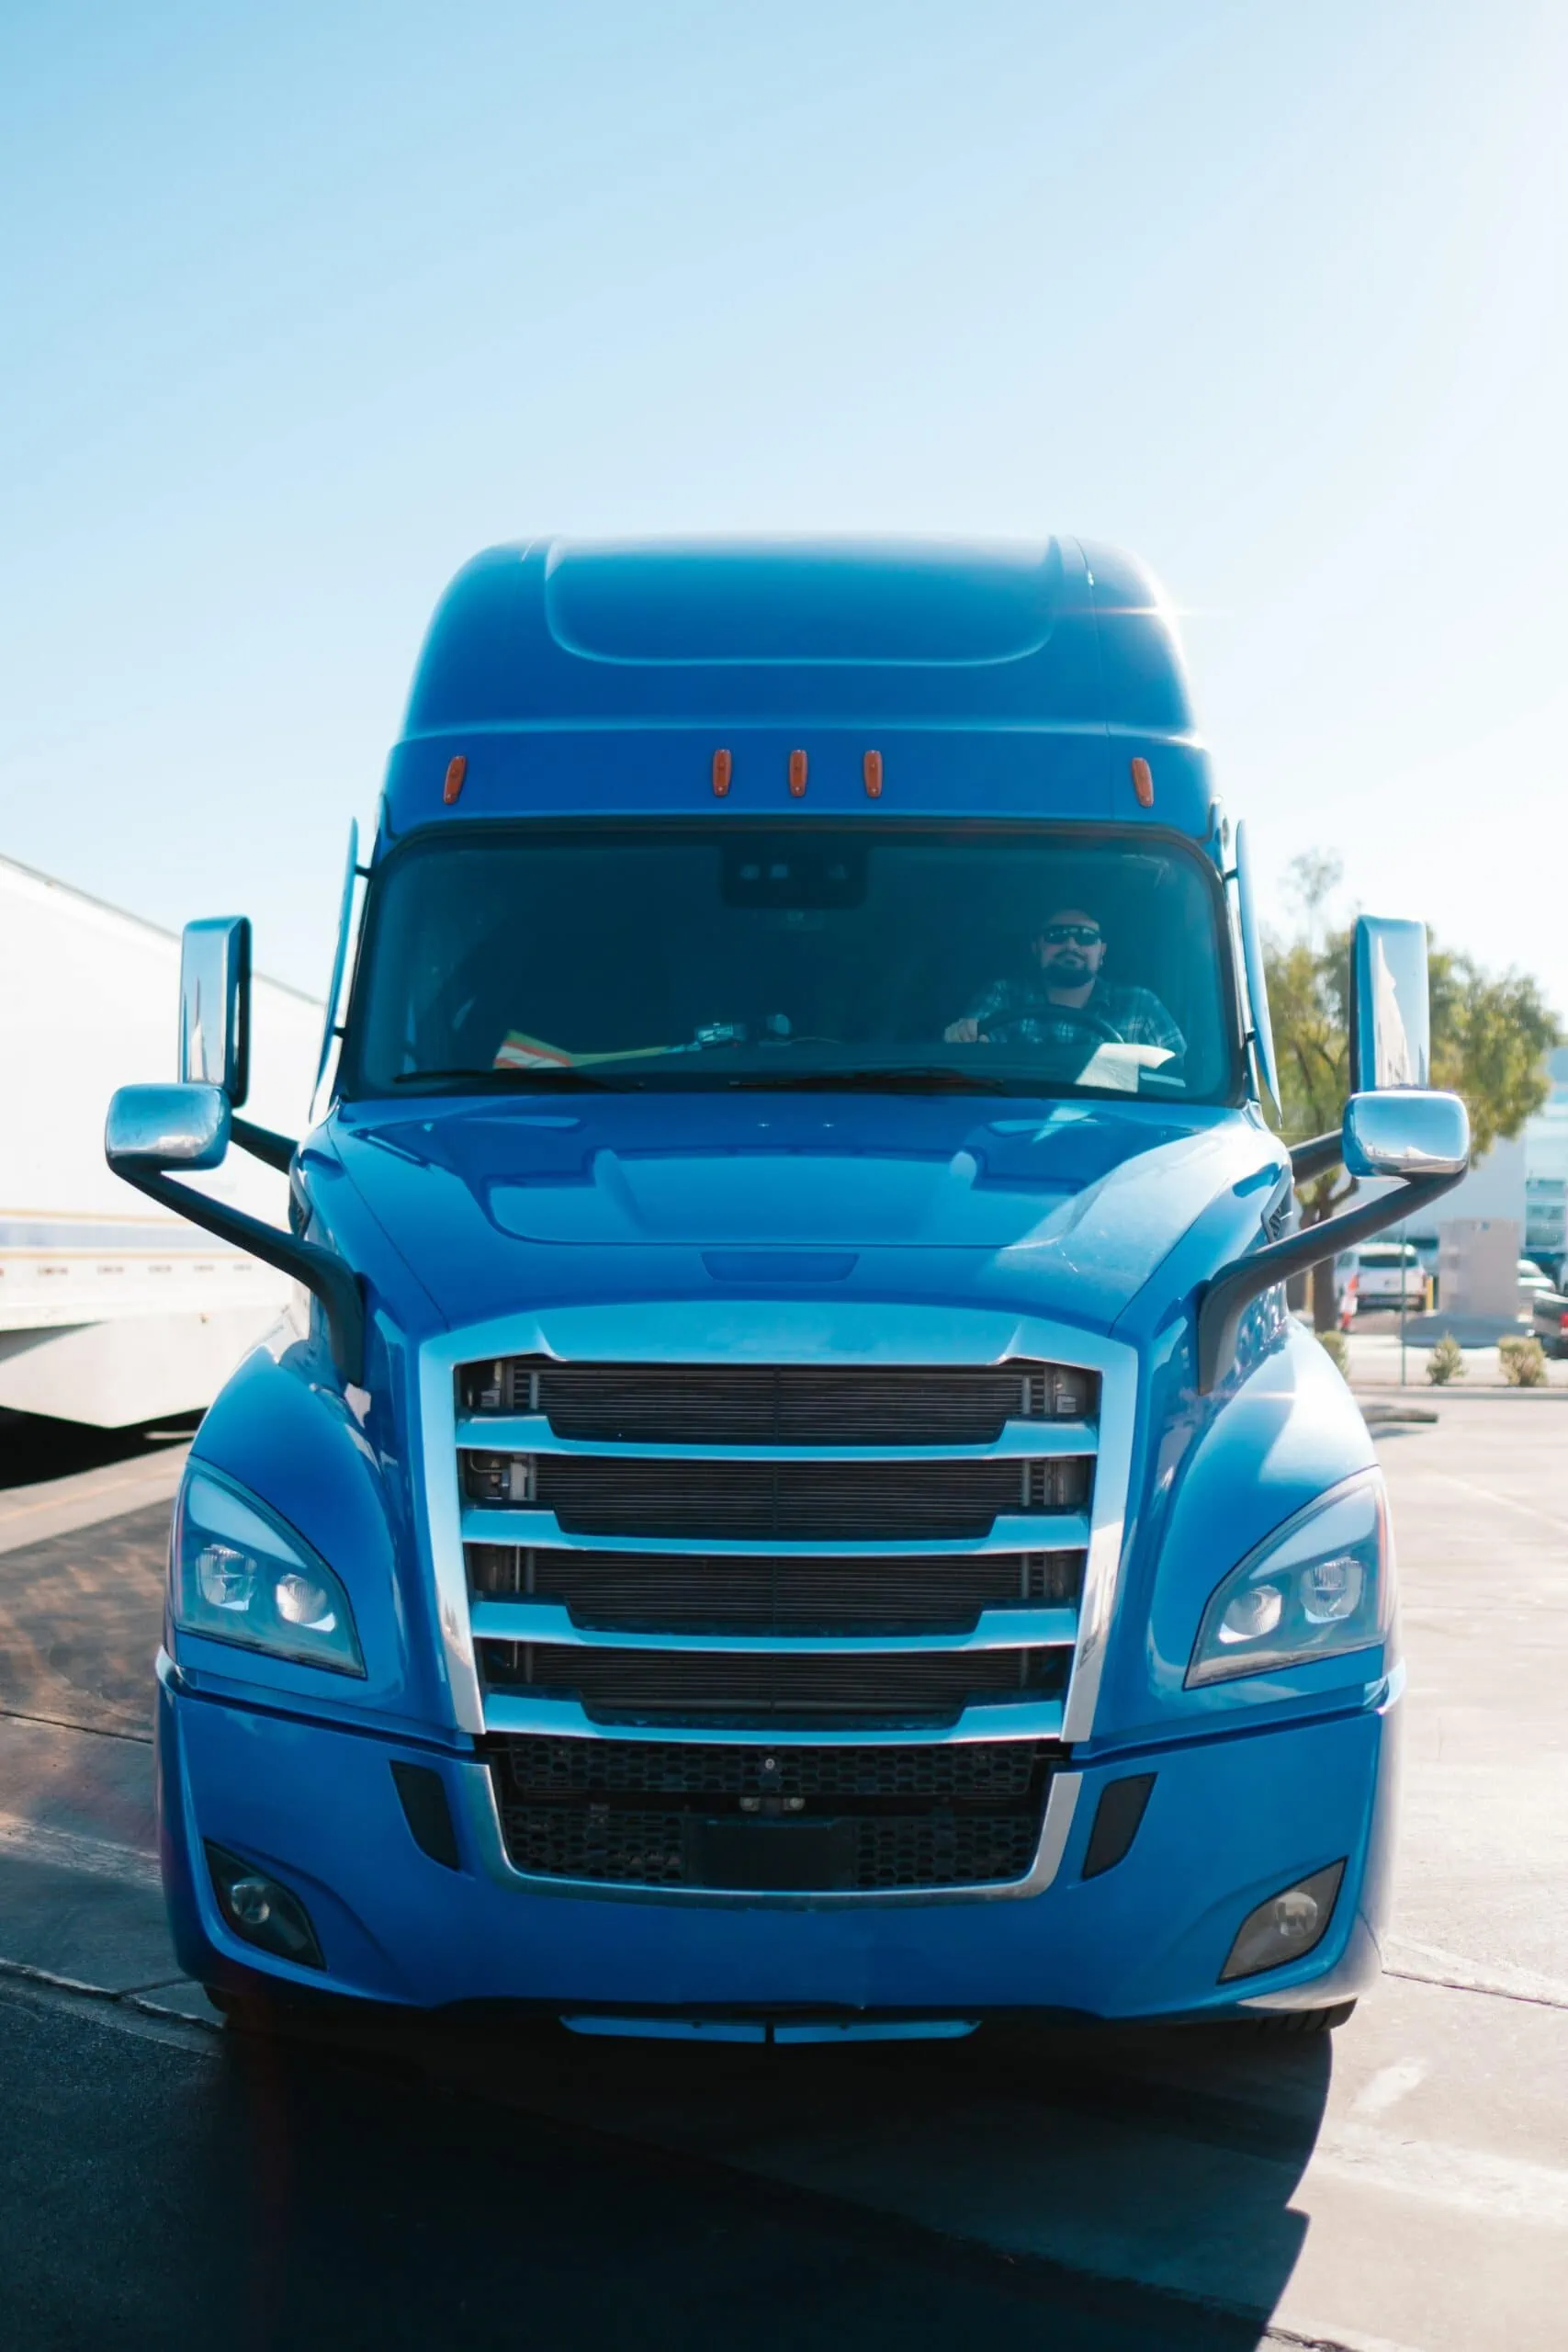 Blue semi-truck, captured from the front, with a trucker inside being coached by GPS tracker with camera